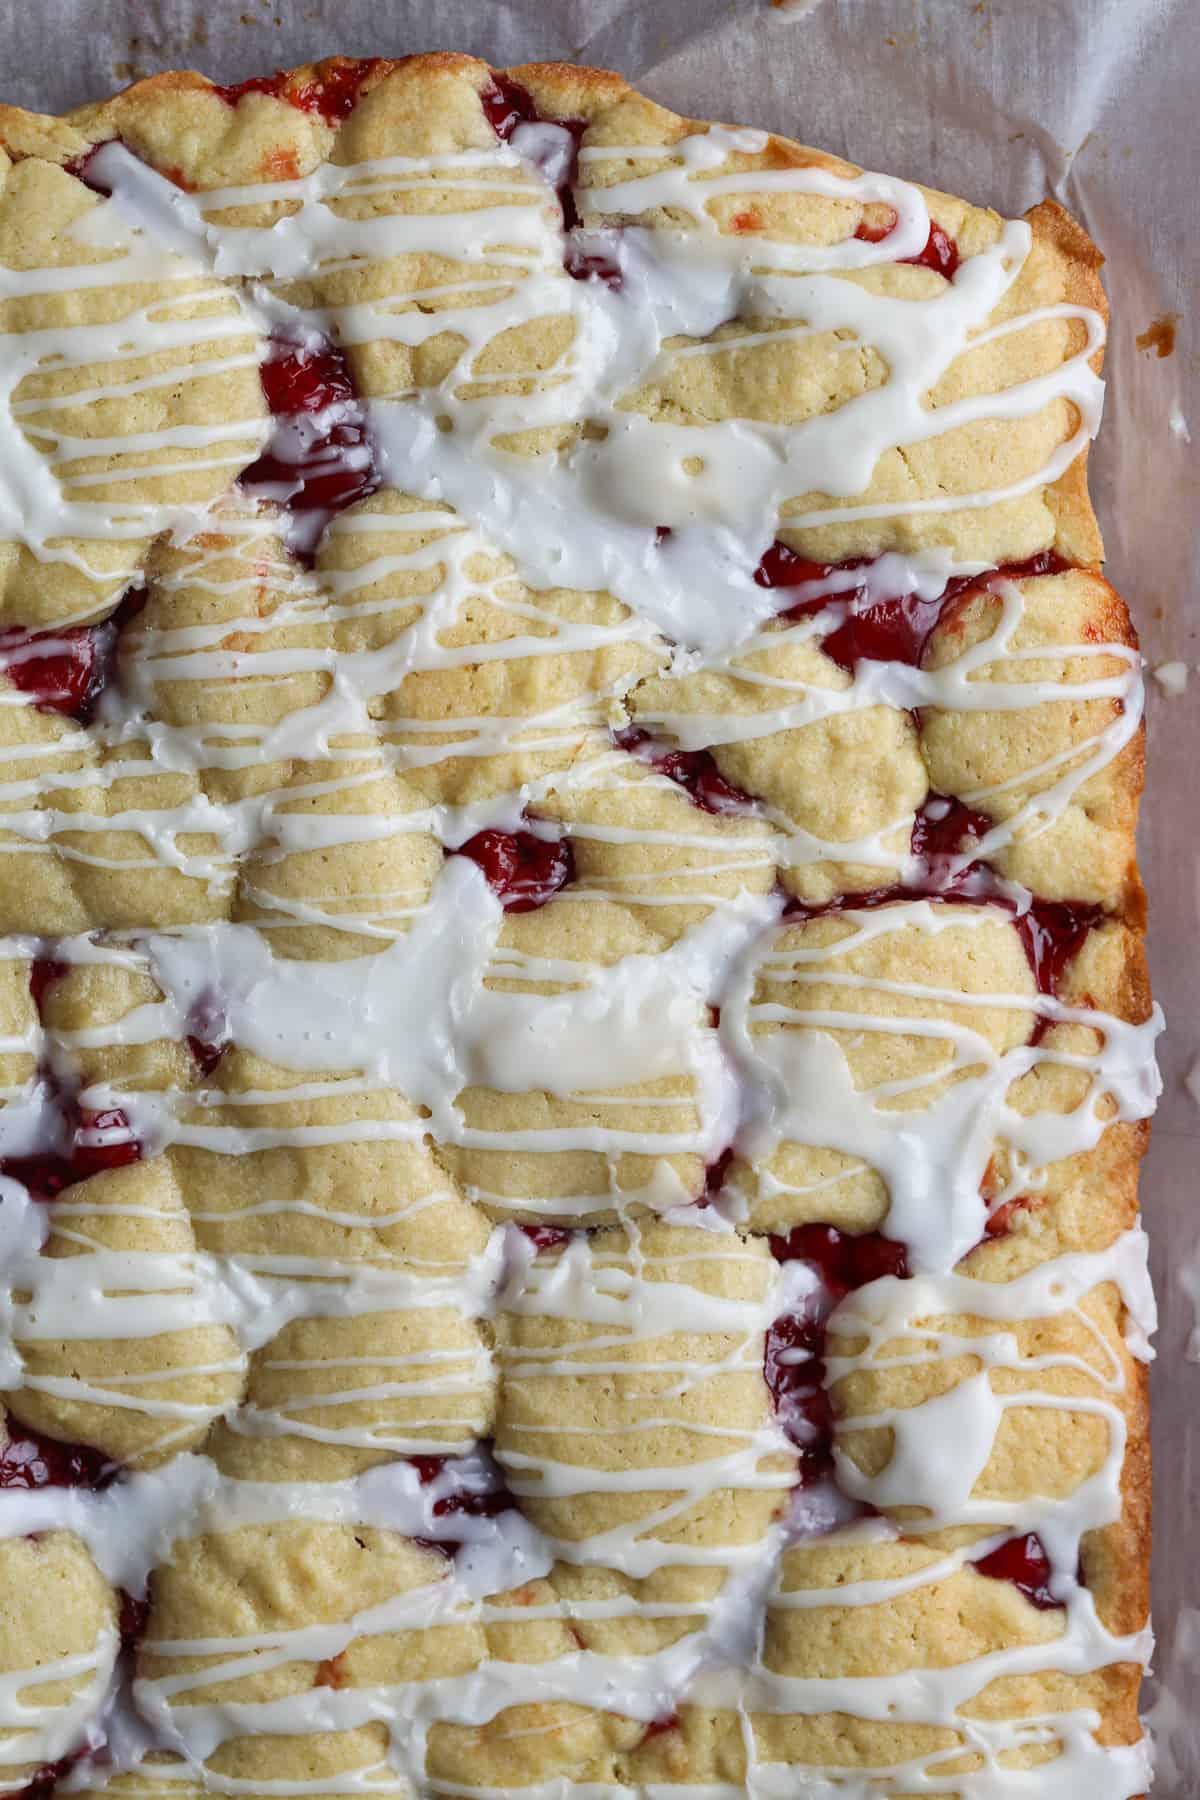 Cherry cake baked in a 9x13 pan with white icing drizzled on top.